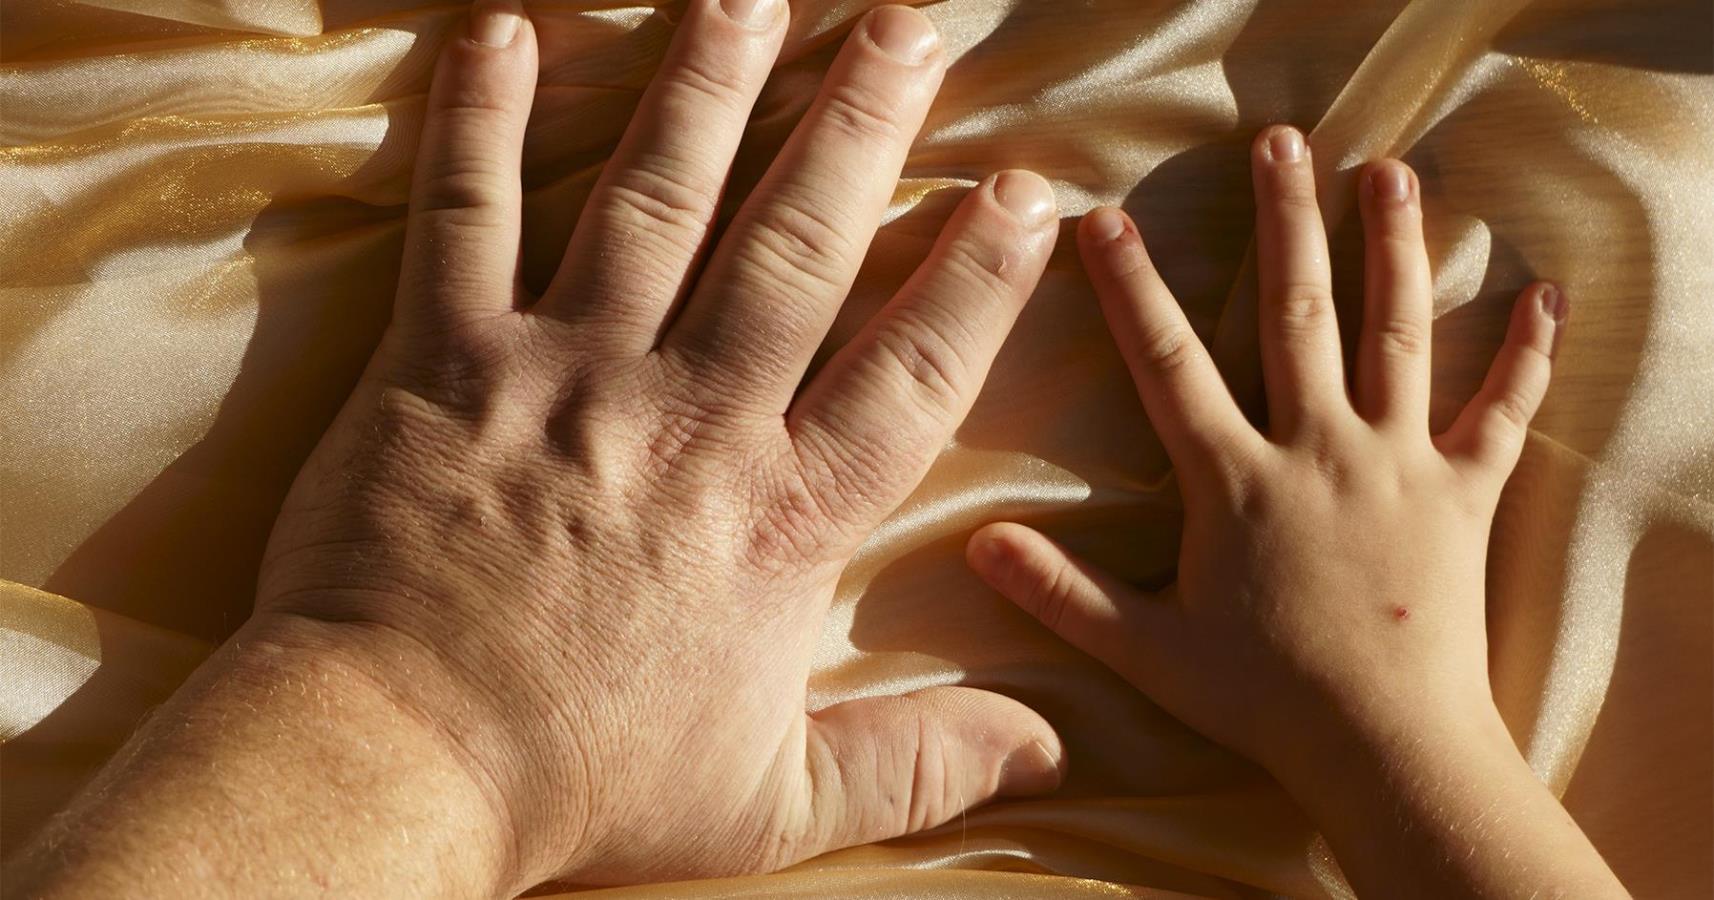 Image of a person with acromegaly comparing size of hands with a child.